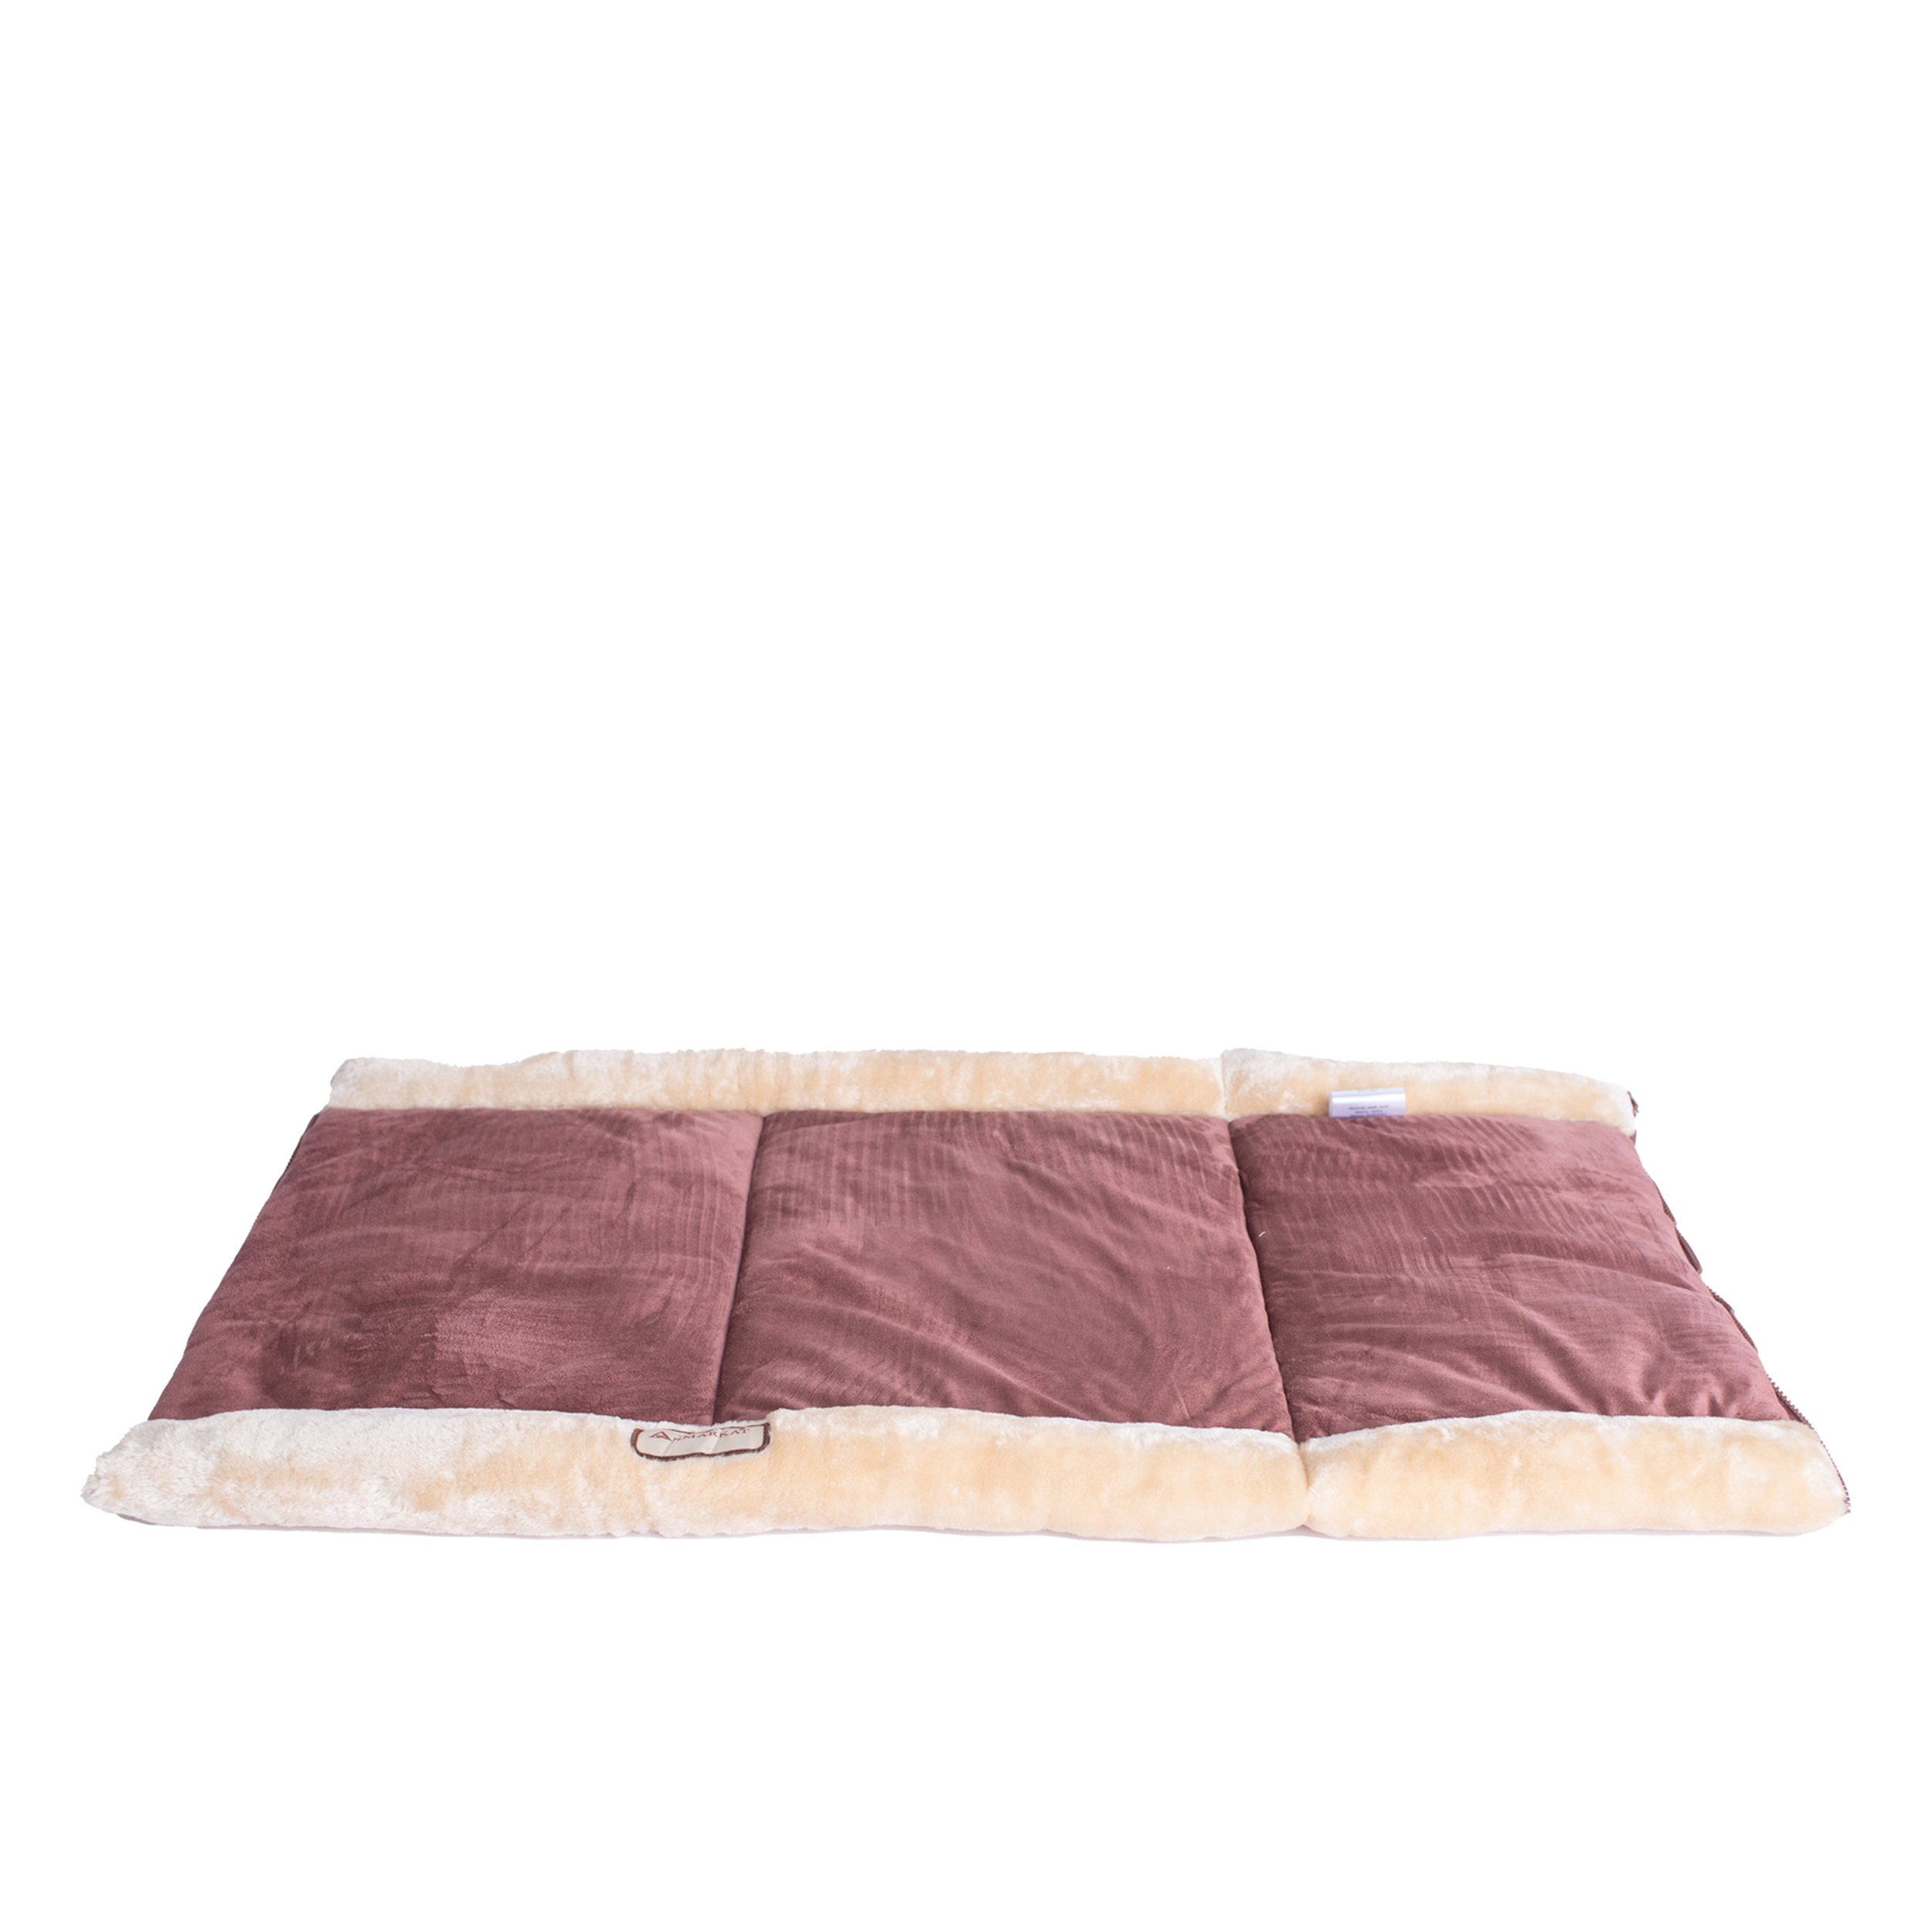 Armarkat Multiple use Cat Bed Pad, 22-Inch by 14-Inch by 10-Inch or 38-Inch by 22-Inch, C16HTH/MH - image 3 of 6